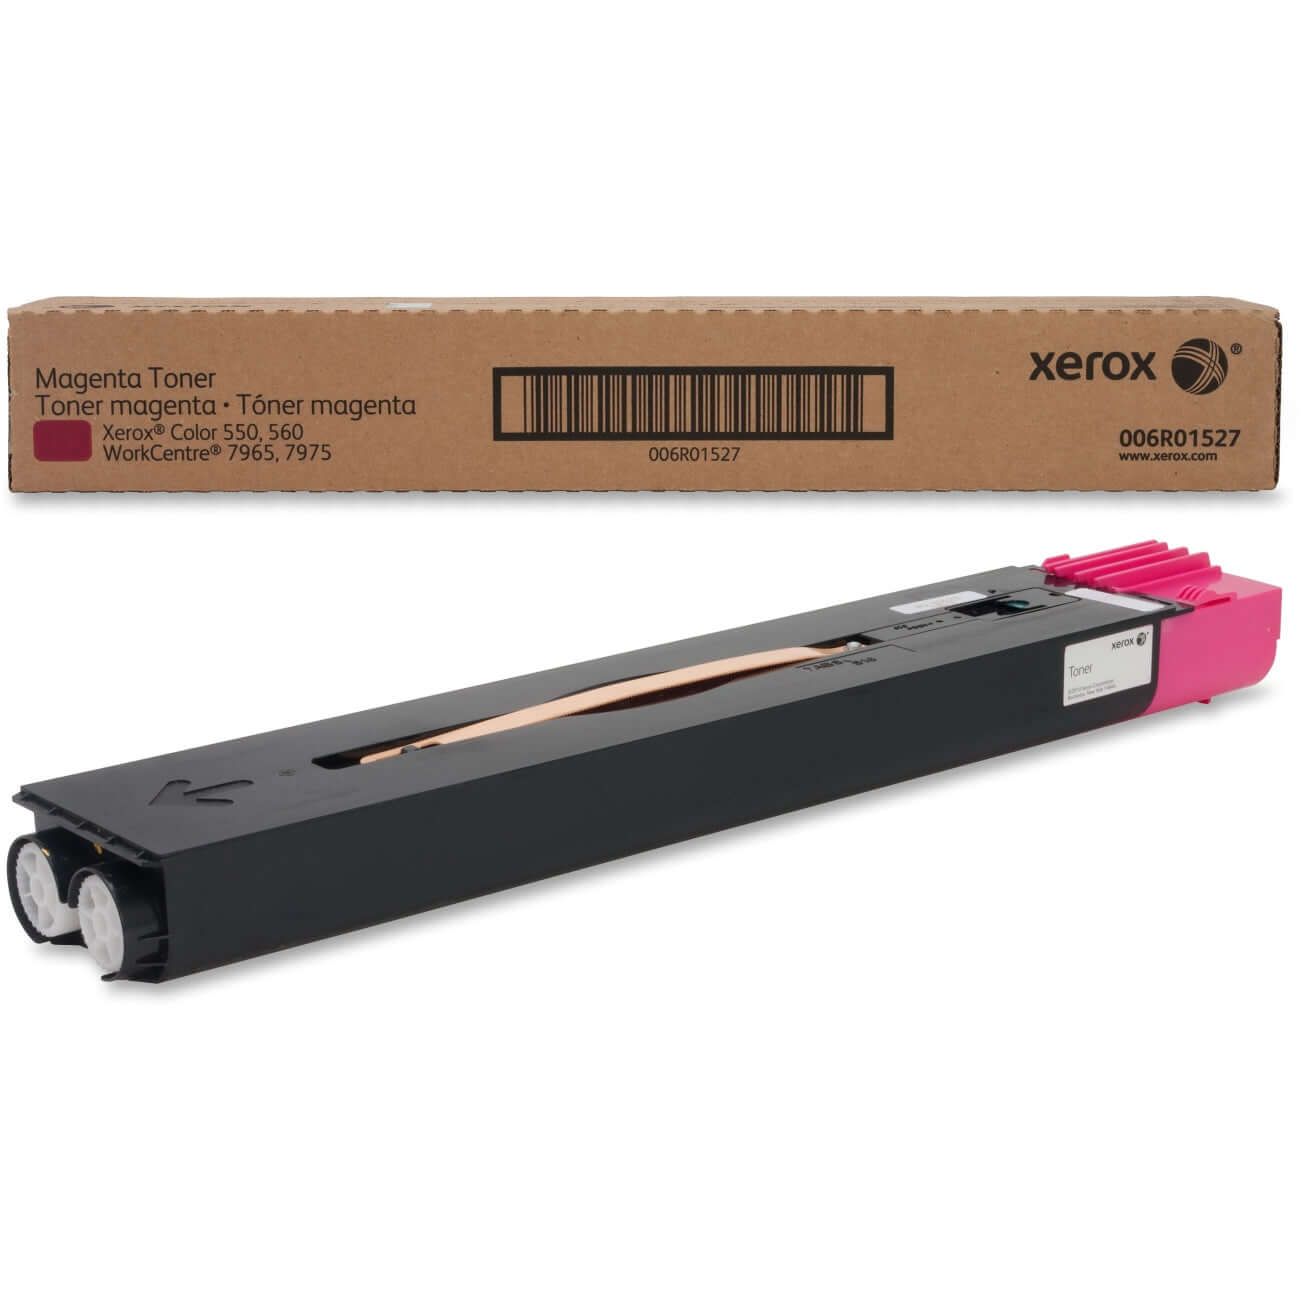 Xerox Magenta Toner Cartridge (32,000 Pages) 006R01527 for Color 550/560/570-Scriptum Supplies